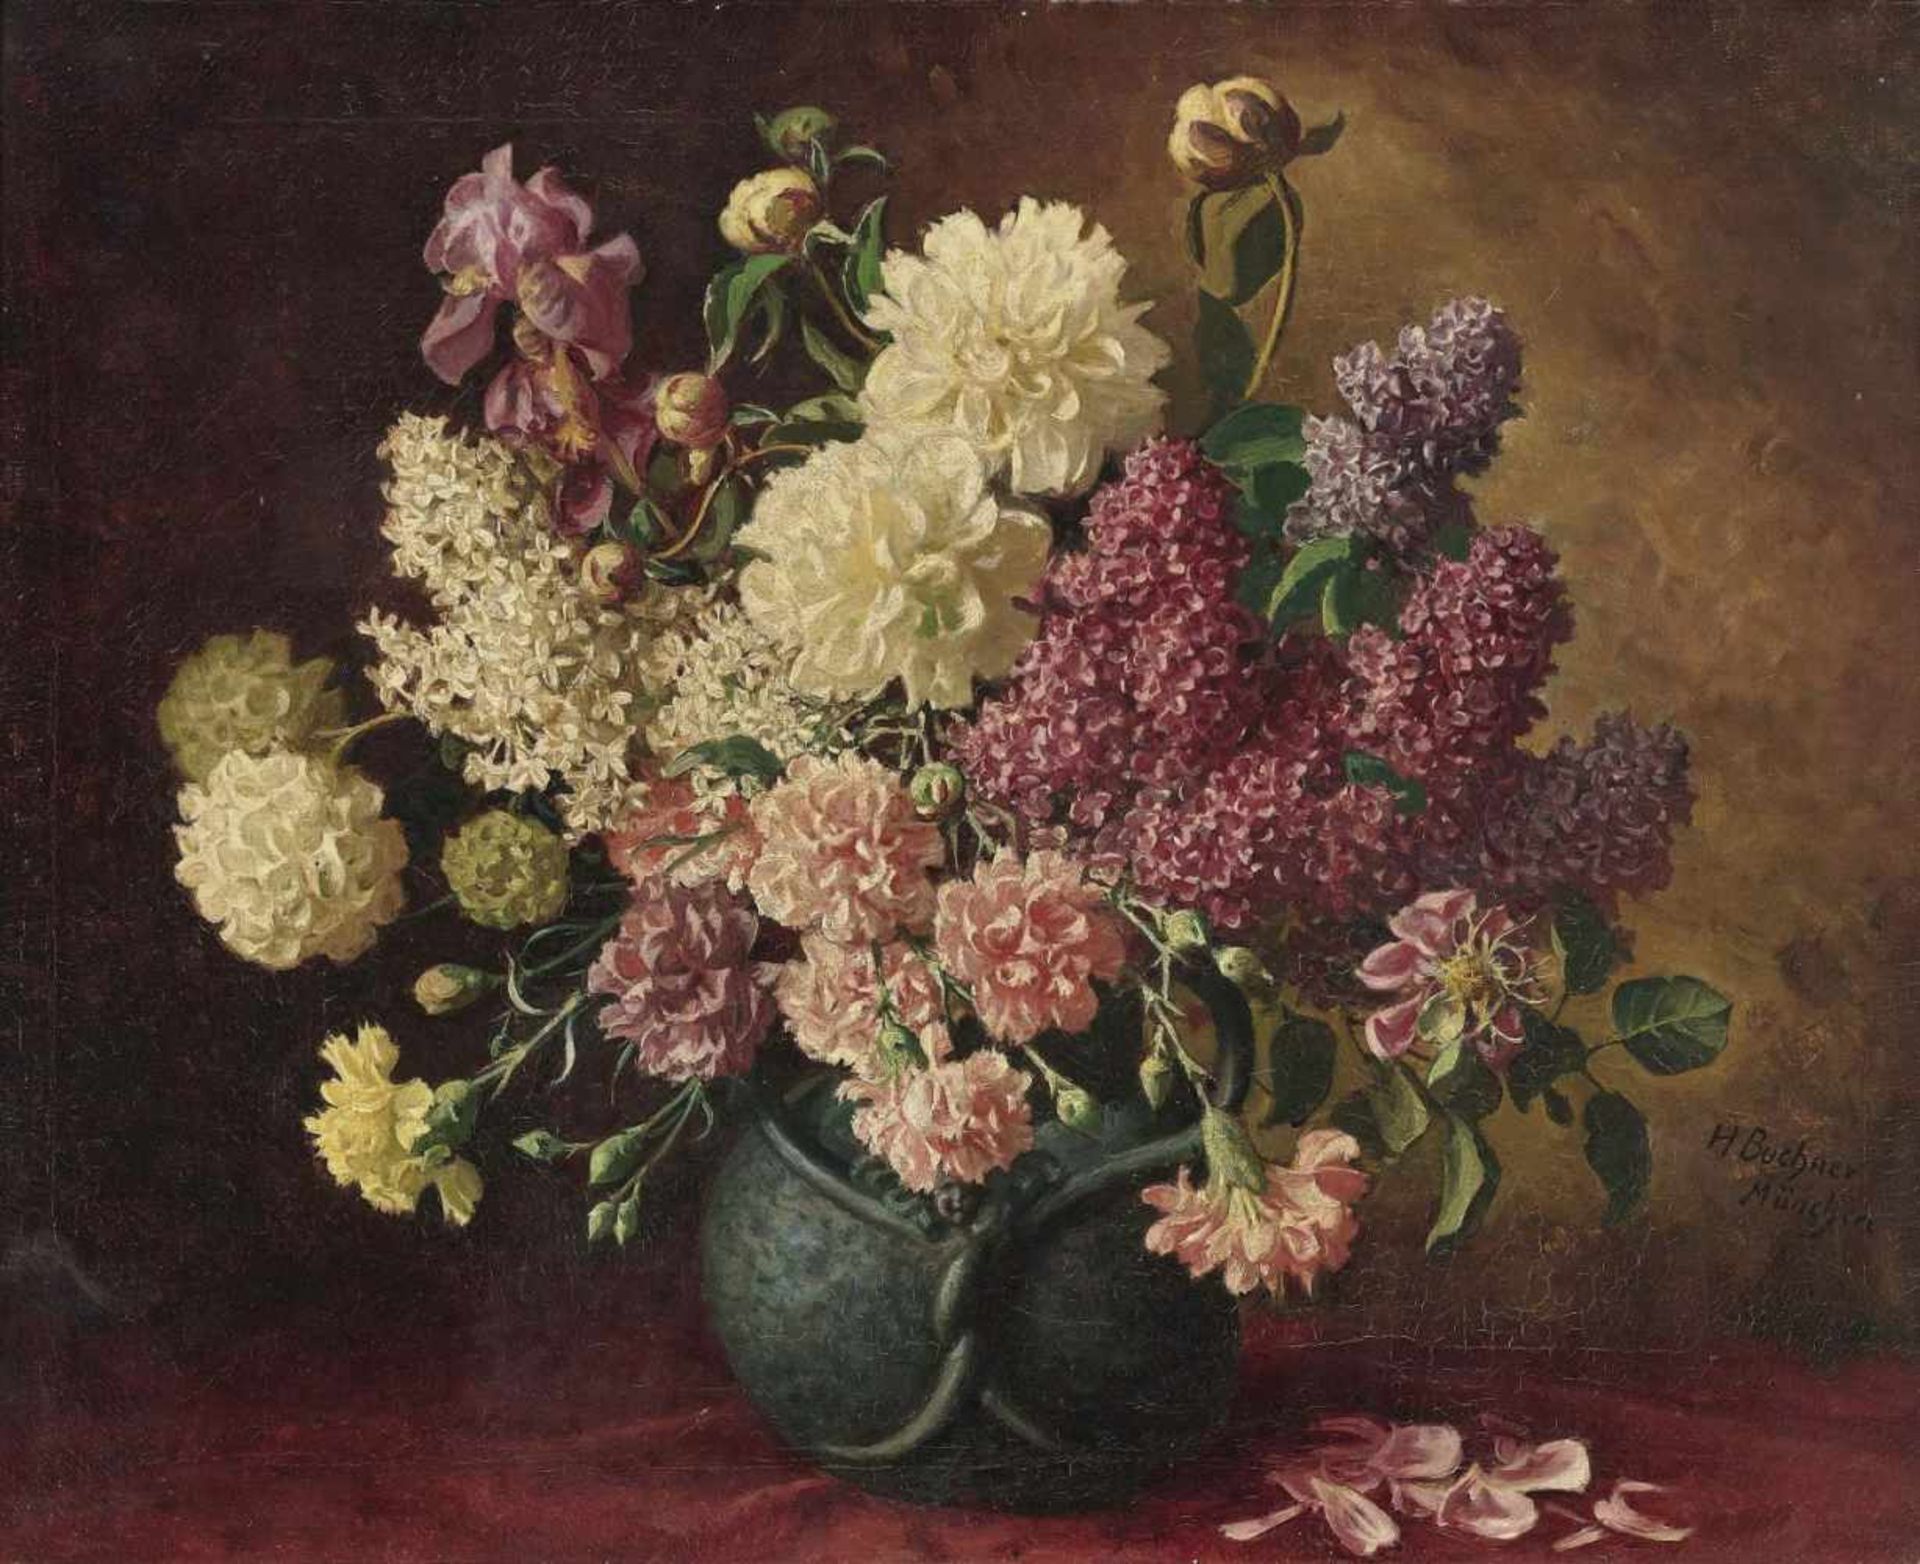 Buchner, HansStill Life of Flowers Signed lower right and inscribed with place name München. Oil